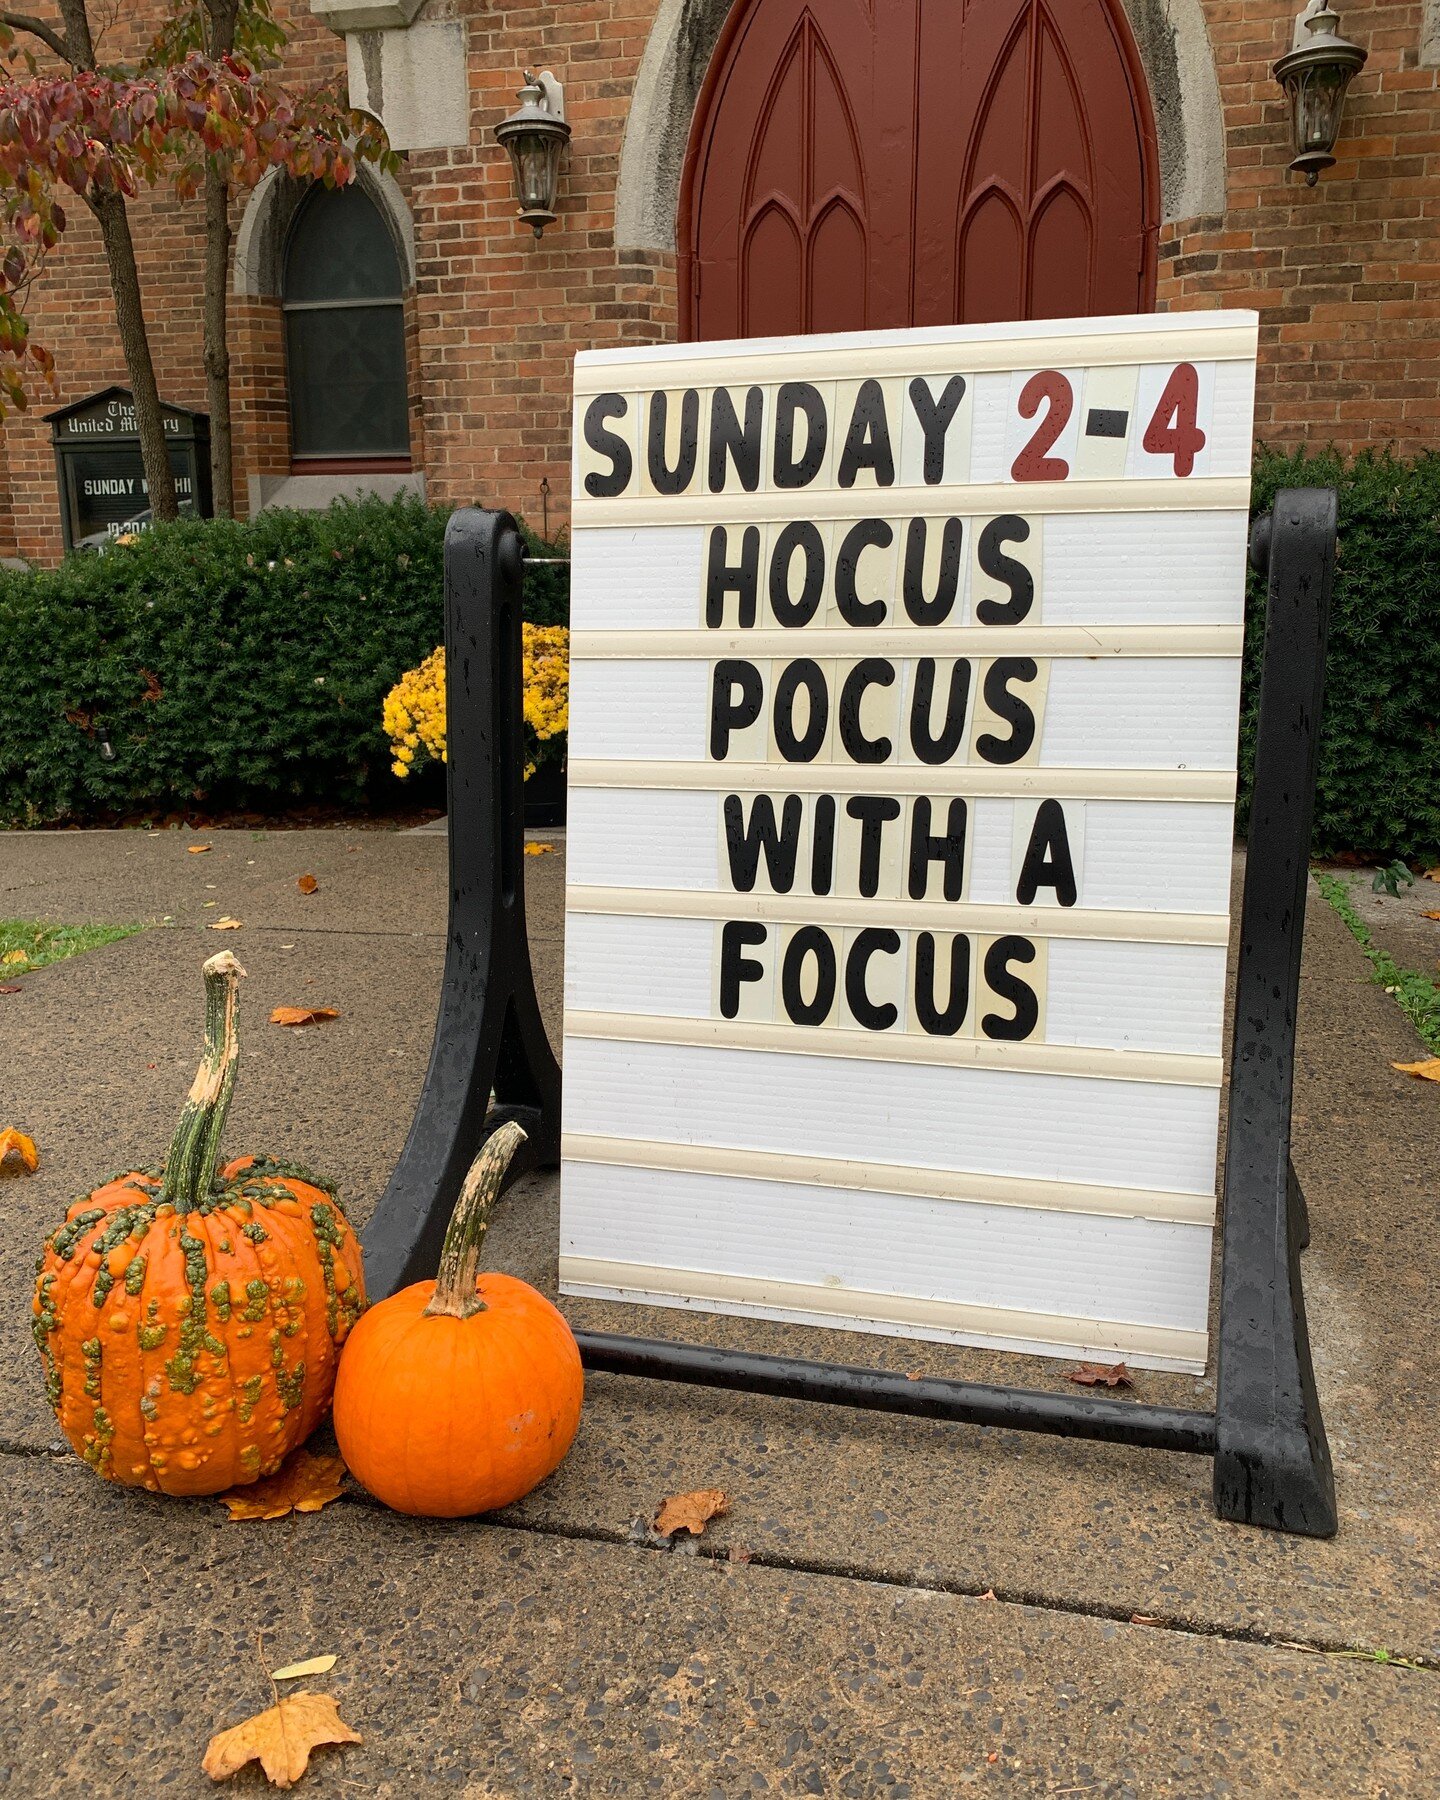 🎃🌟 Join us for the Hocus Pocus with a Focus tomorrow (Sunday, Oct 22) from 2:00-4:00 pm, at the United Ministry of Aurora! 🌟🎃

We're looking forward to:
🎨 Face Painting
🎈 Balloon Animals 
🎶 Hip Hop Dance Instruction
🧘🏾 Kids Halloween Yoga 
✨